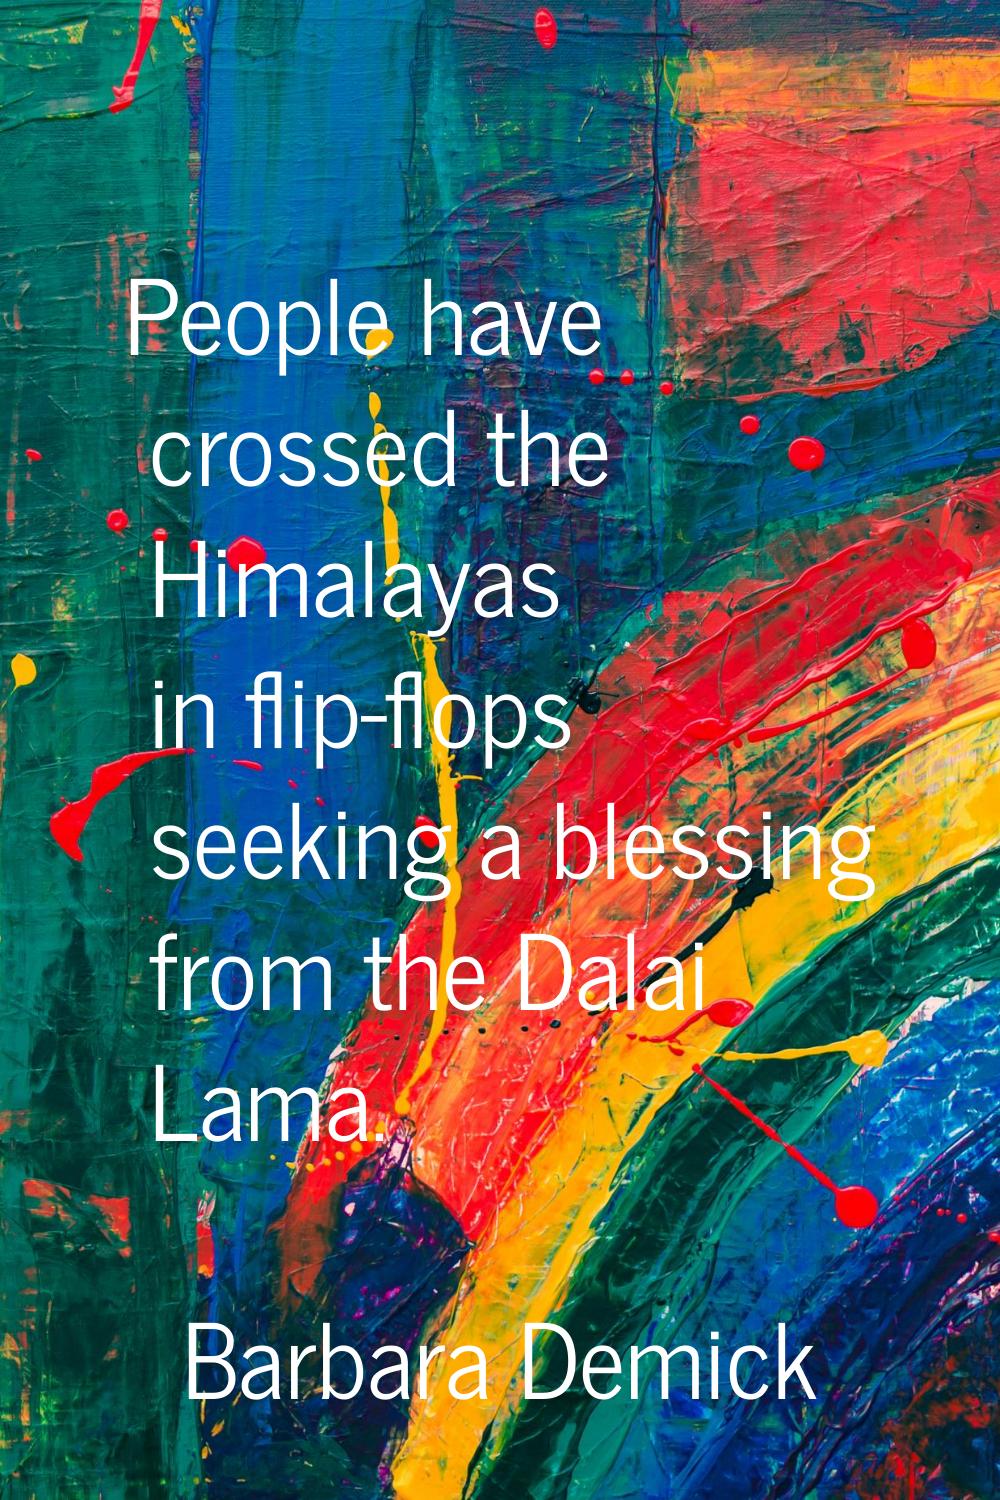 People have crossed the Himalayas in flip-flops seeking a blessing from the Dalai Lama.